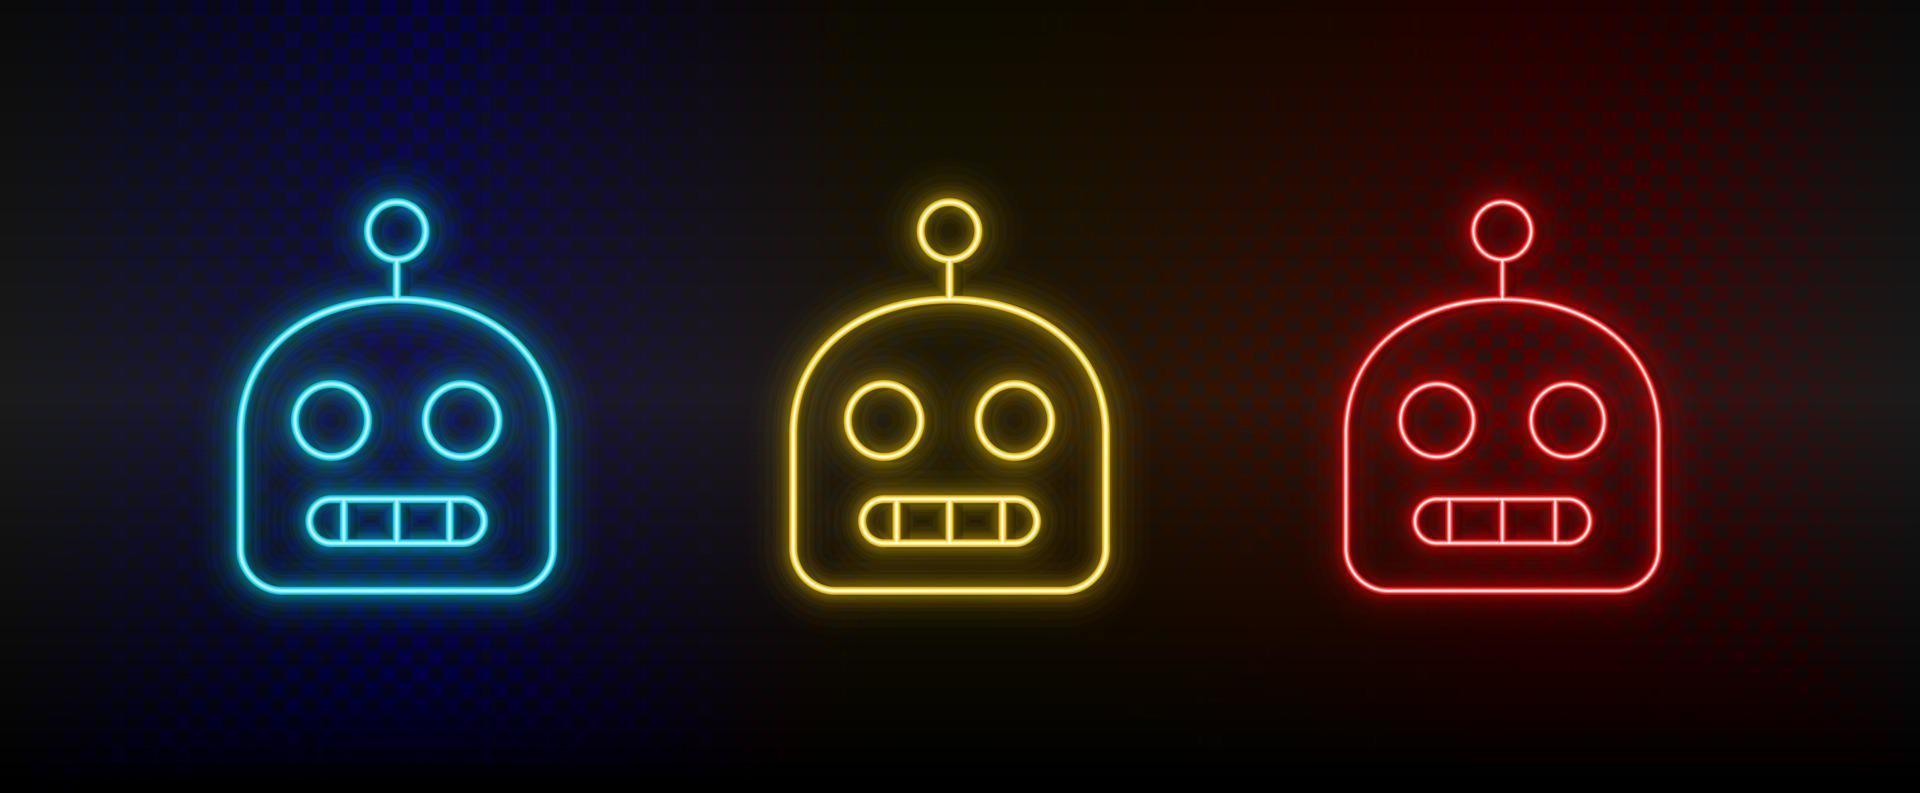 Neon icons. robot. Set of red, blue, yellow neon vector icon on darken background